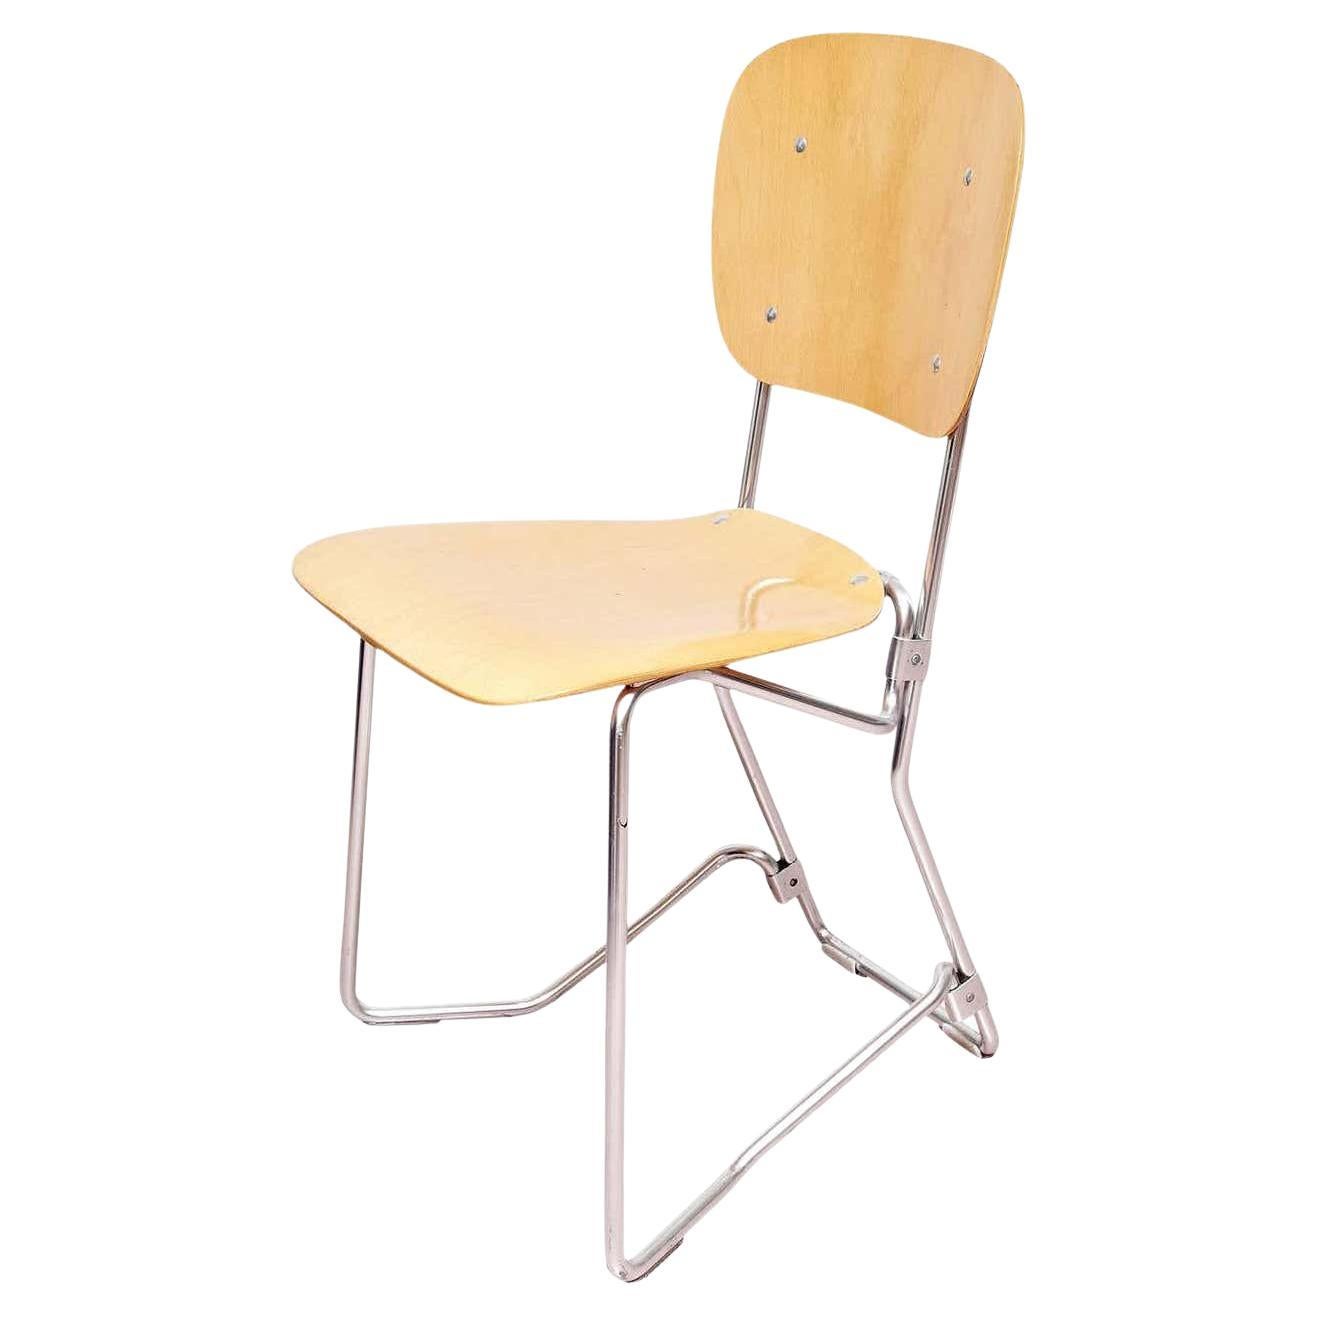 Armin Wirth Mid-Century Modern Metal and Wood Swiss Stackable Chairs for Aluflex For Sale